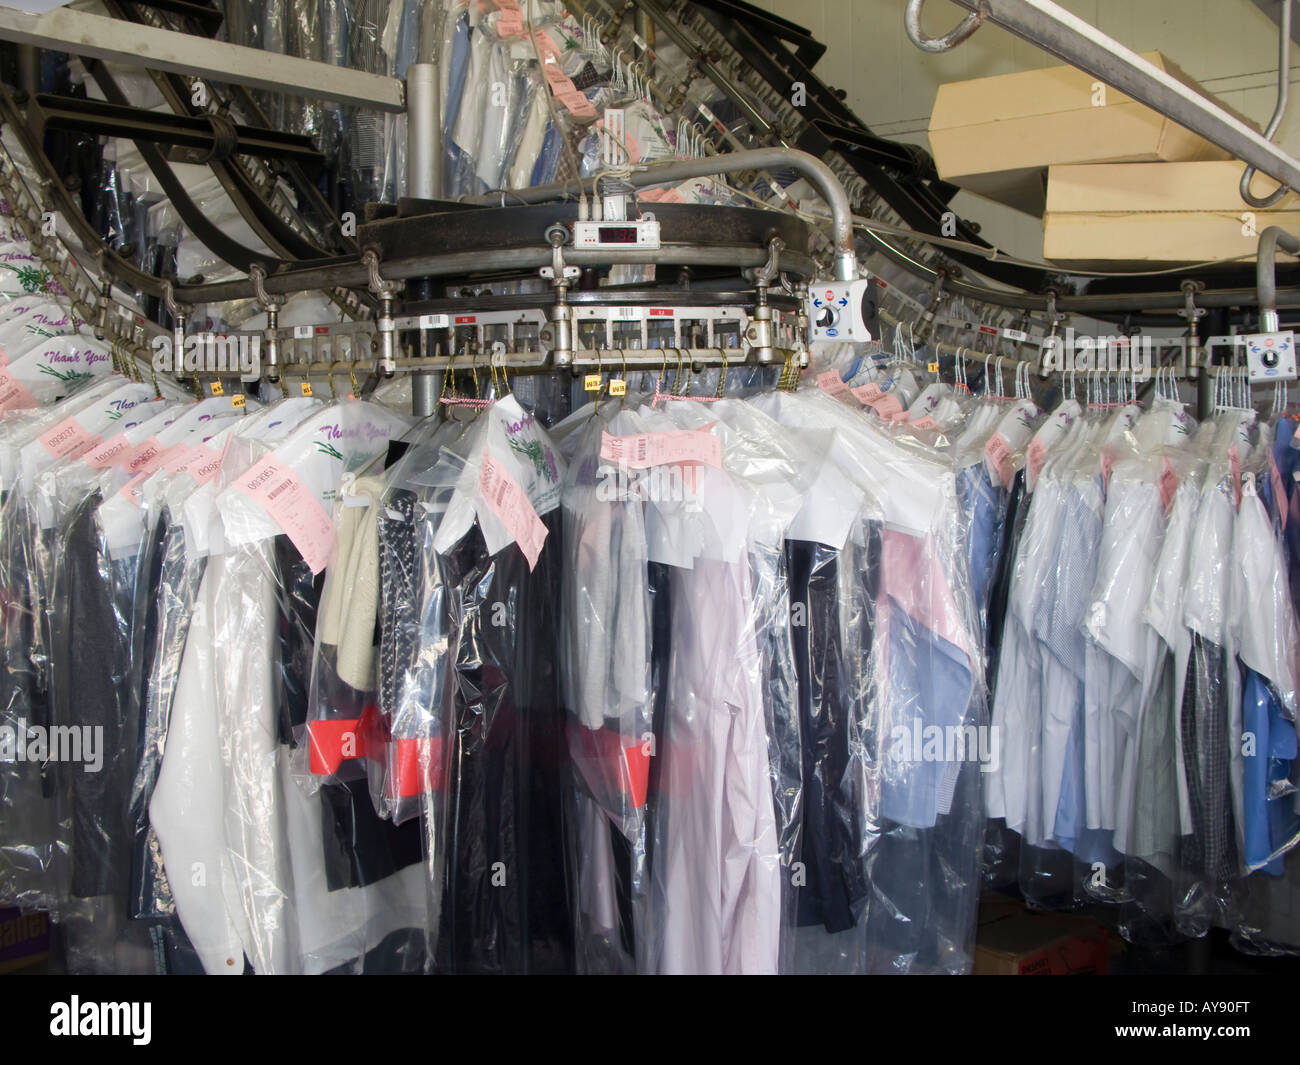 https://c8.alamy.com/comp/AY90FT/dry-cleaning-on-movable-conveyor-washington-dc-usa-AY90FT.jpg